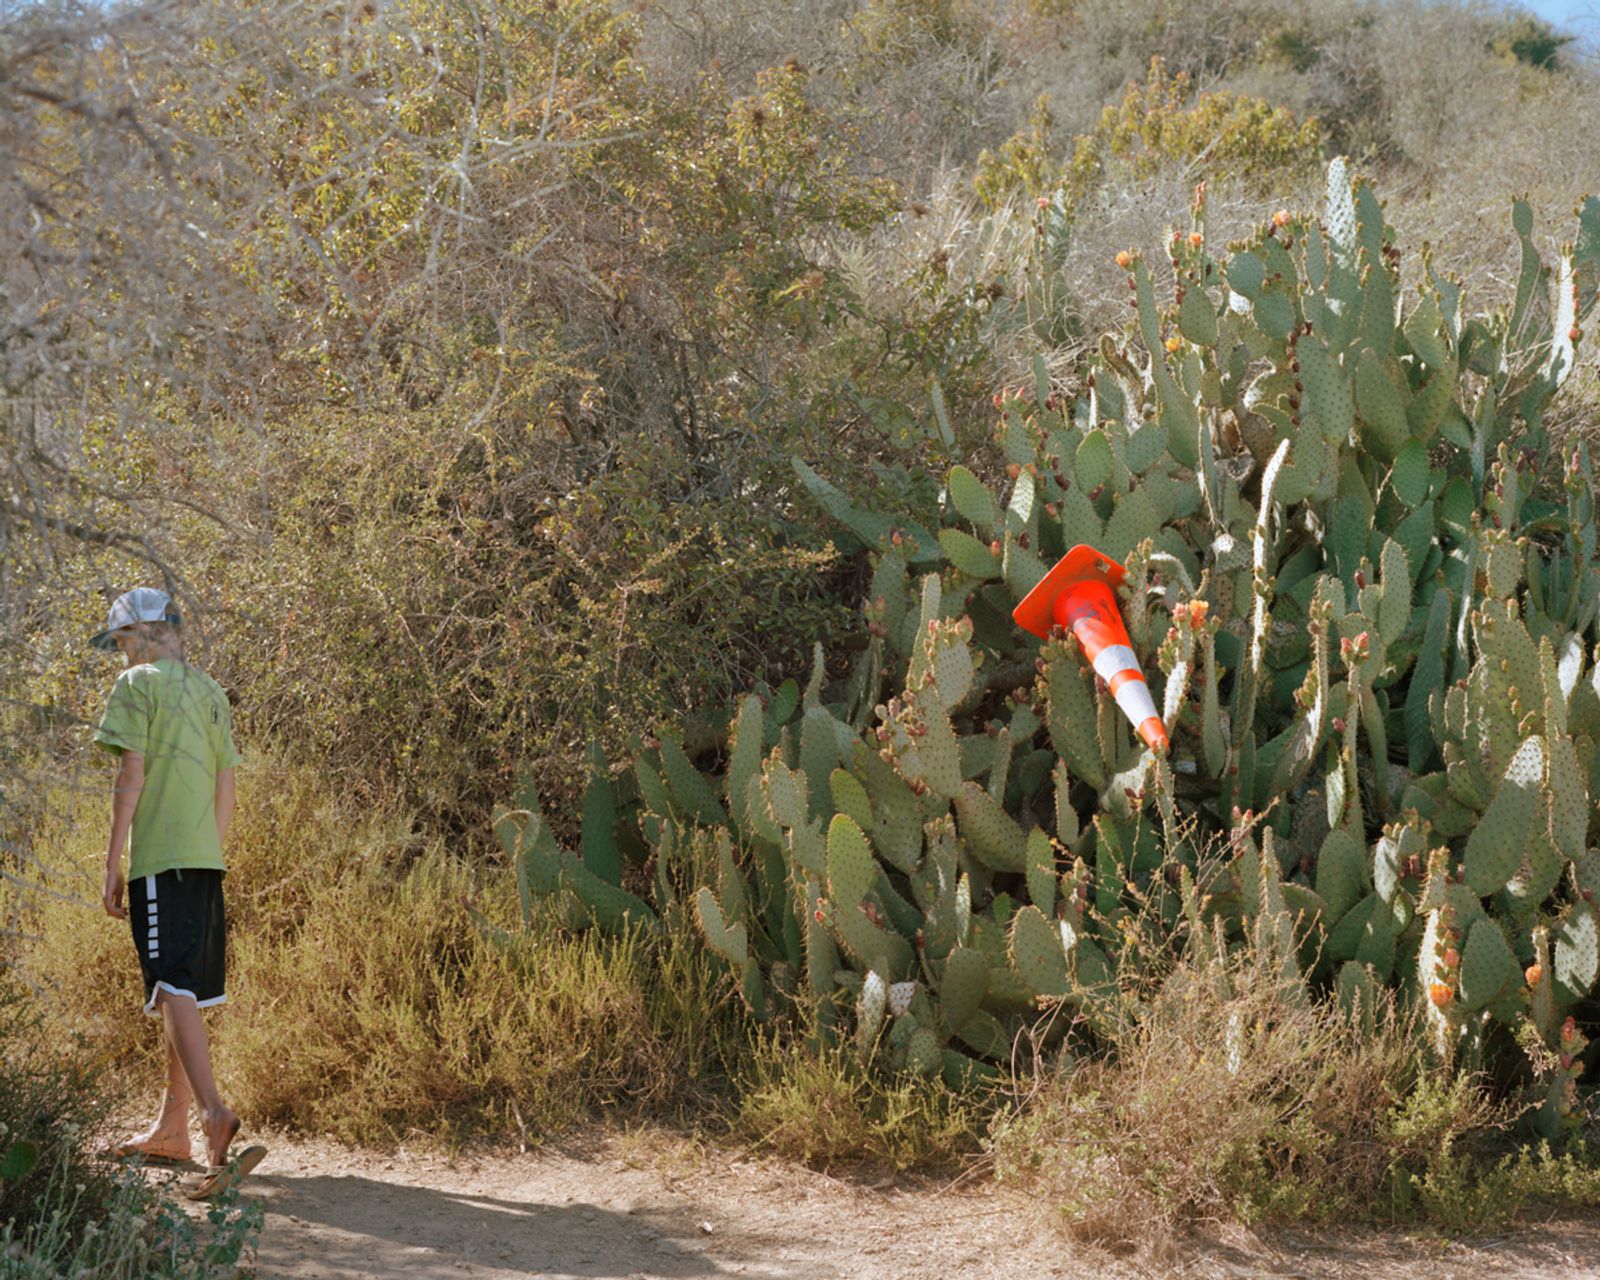 © Tracy L Chandler - Prickly Pear with Safety Cone, 2021